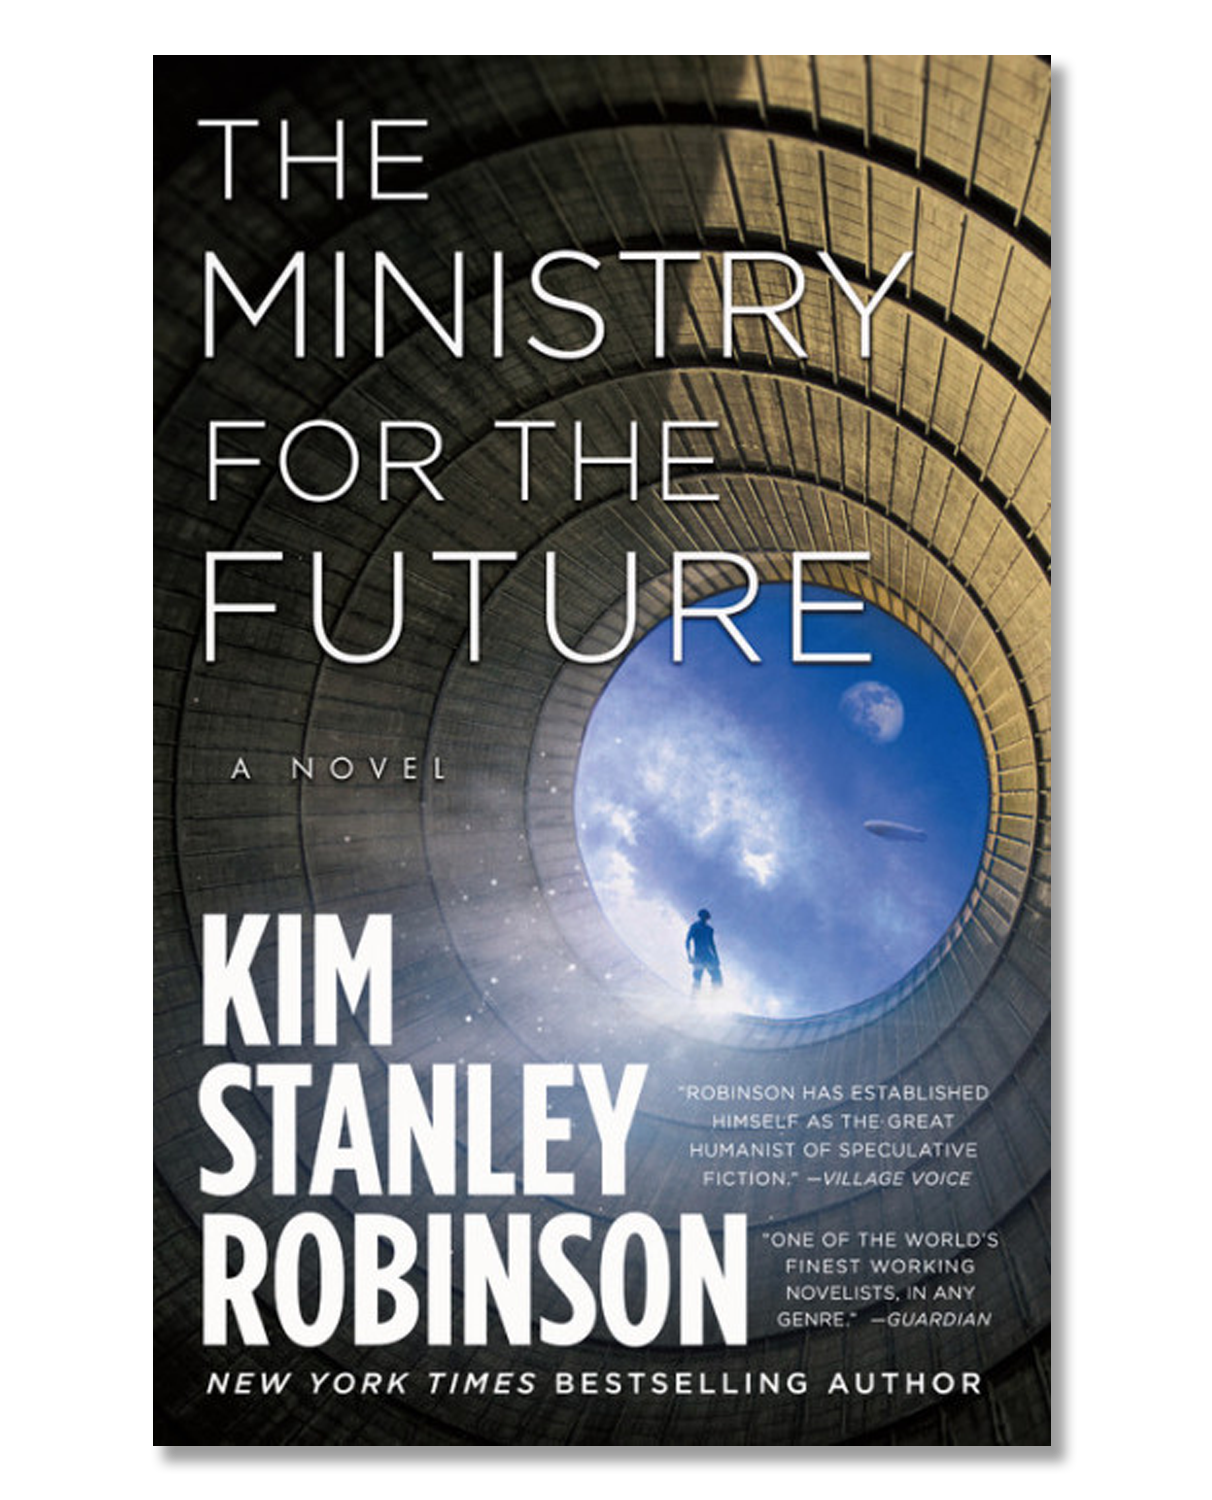 Reviewed: "How to Avoid a Climate Disaster" by Bill Gates, "The Ministry for the Future" by Kim Stanley Robinson, and "Under a White Sky" by Elizabeth Kolbert